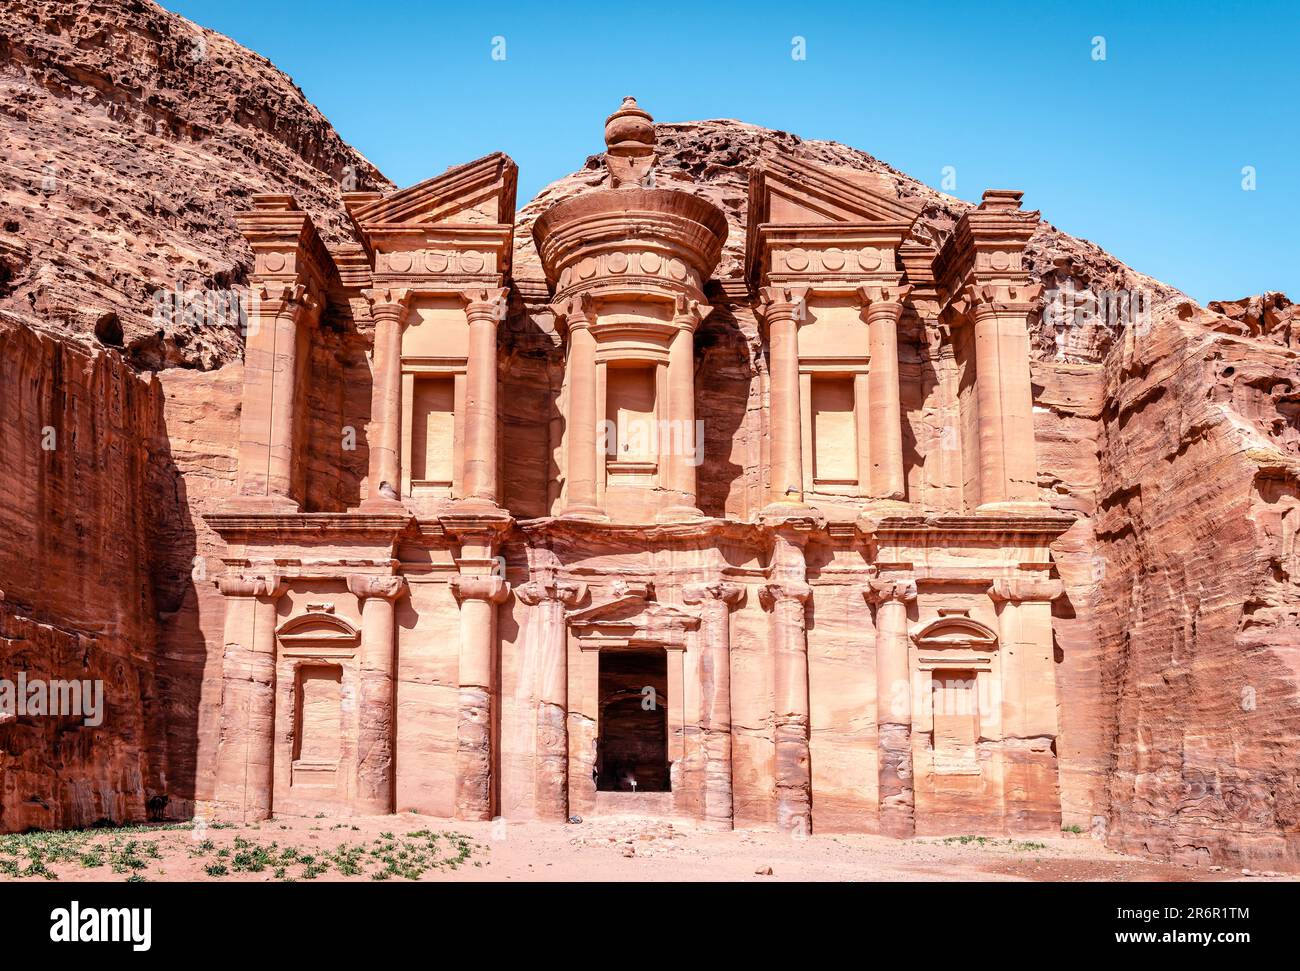 The Monastery, arguably one of the most iconic monuments in the Petra Archaeological Park in Jordan. Stock Photo